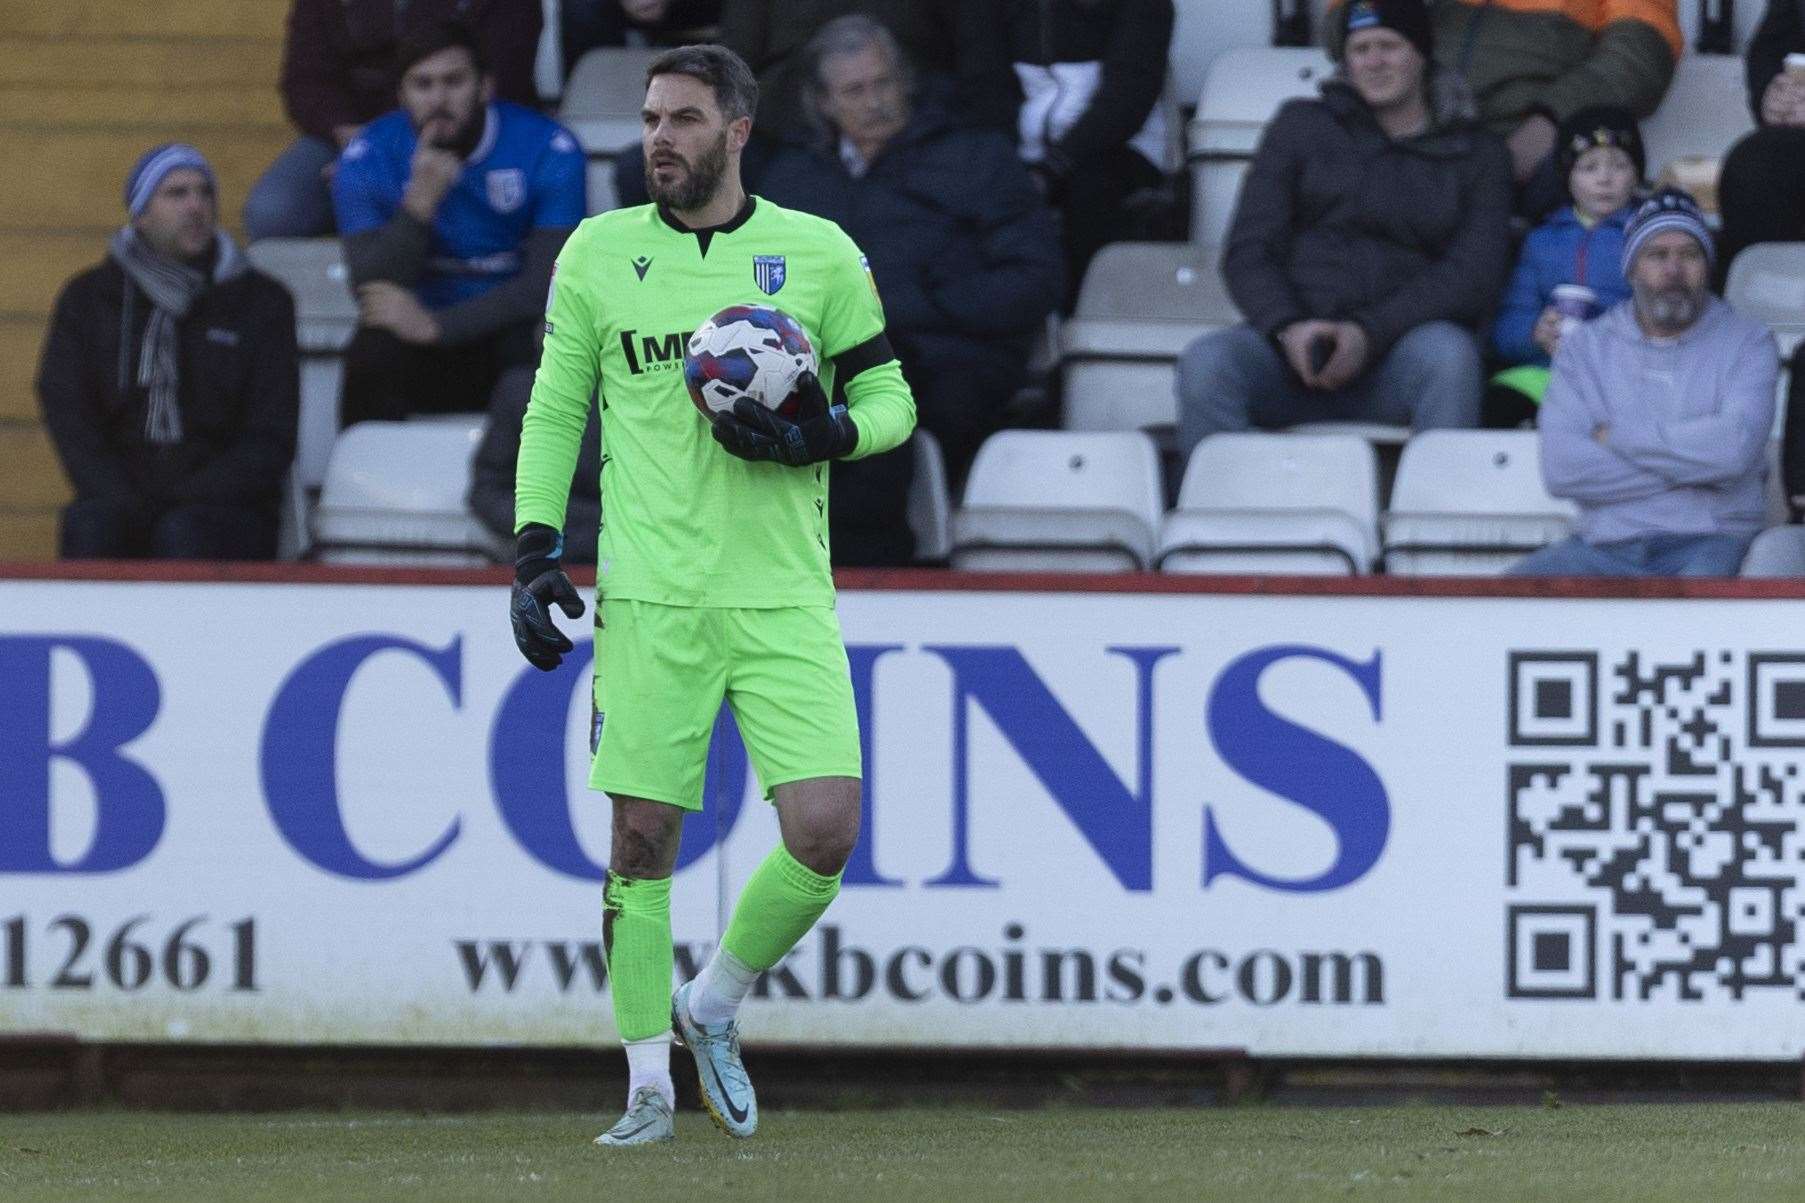 Glenn Morris was back in goal for Gillingham as his loan from Crawley came to an end